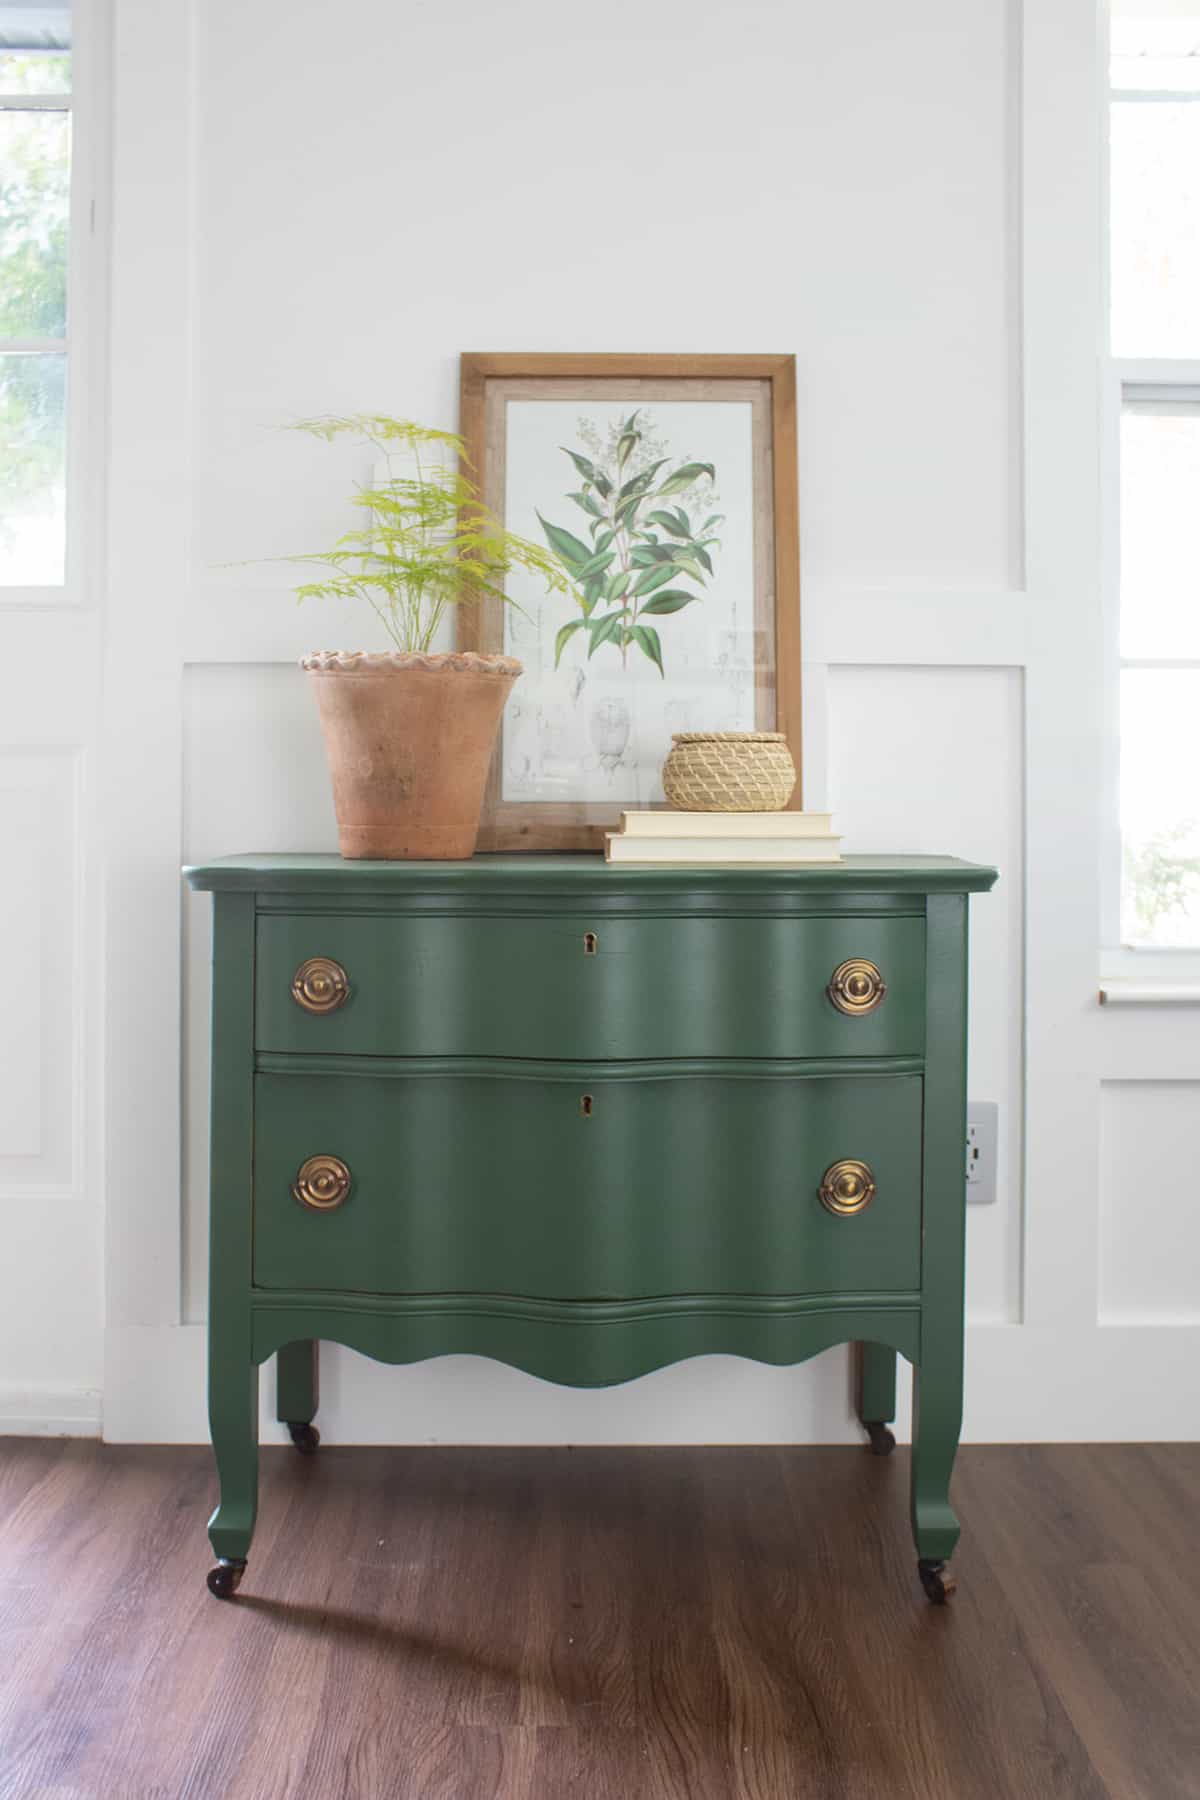 Vine green antique dresser with brass pulls and legs against white wood background wall with decorated top.